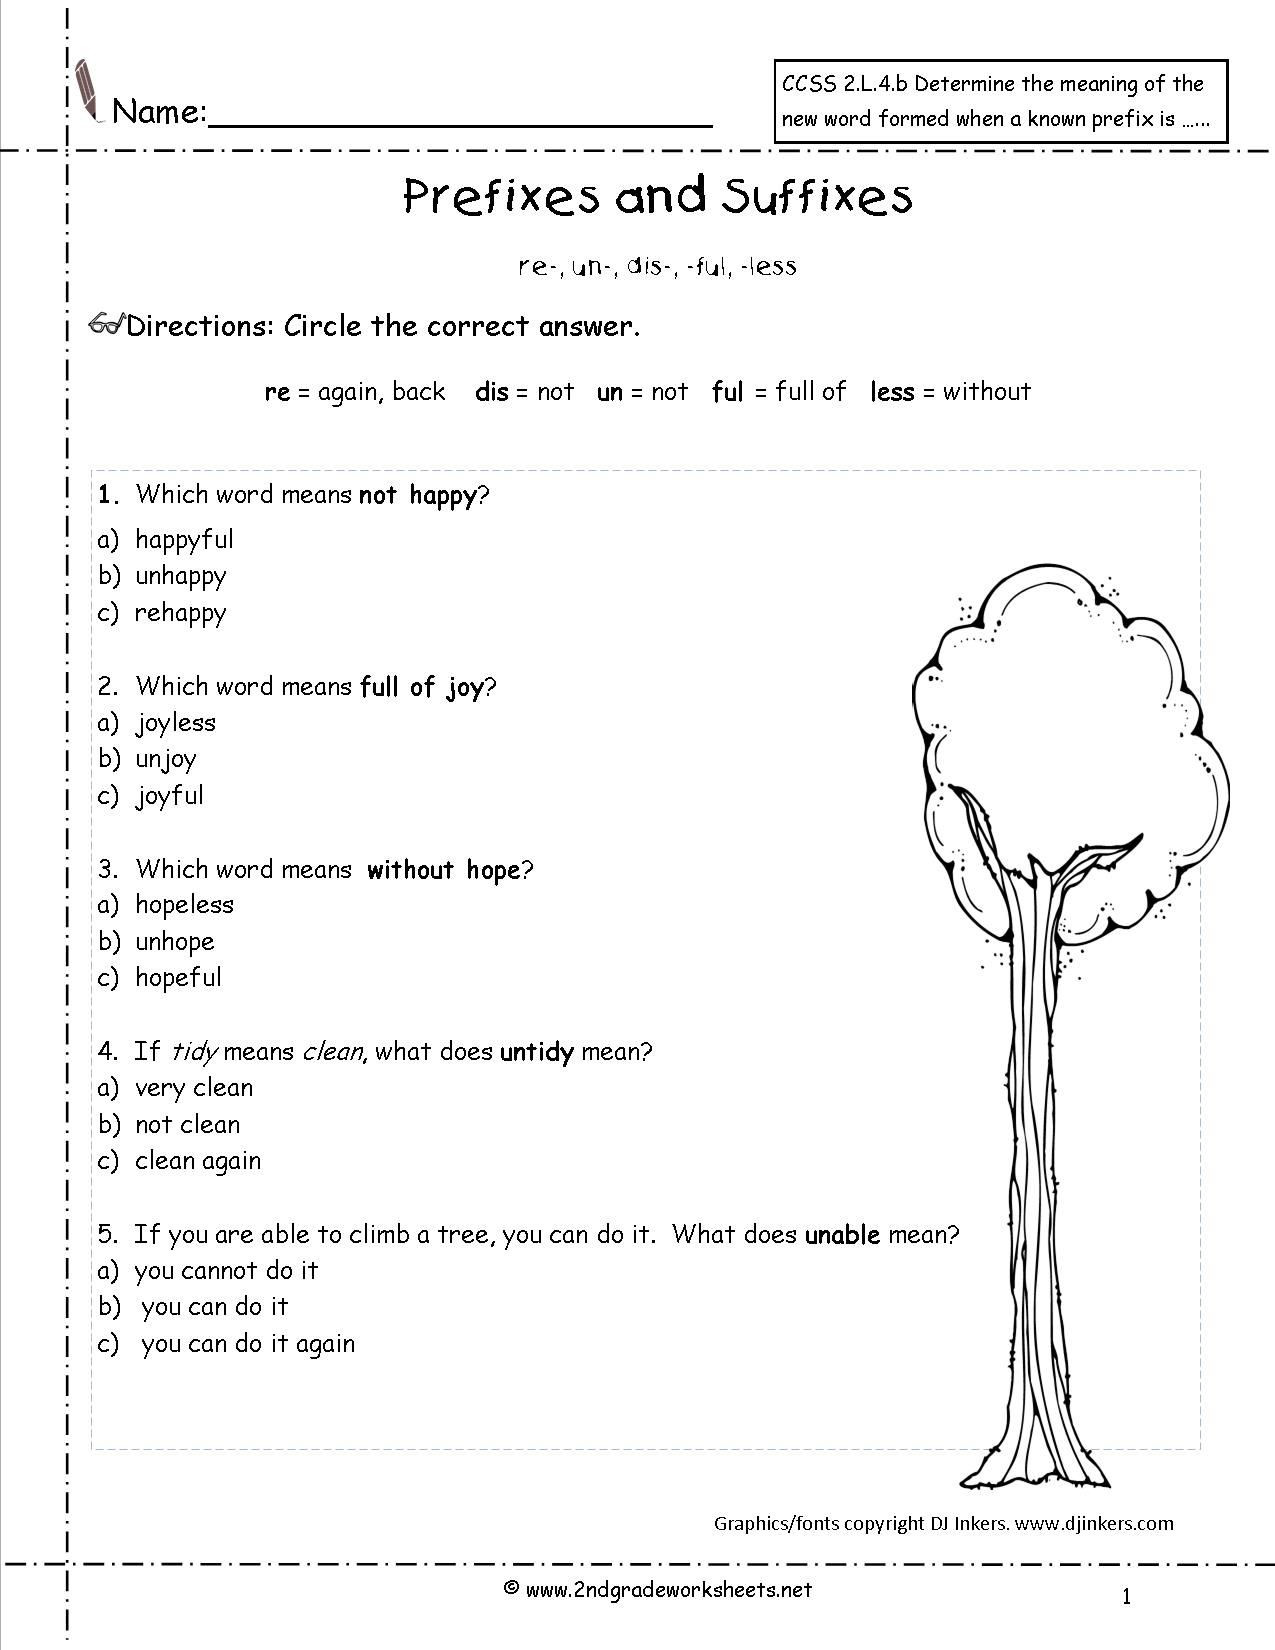 Prefix Suffix Worksheets 3rd Grade Prefix and Suffix Meanings Worksheets